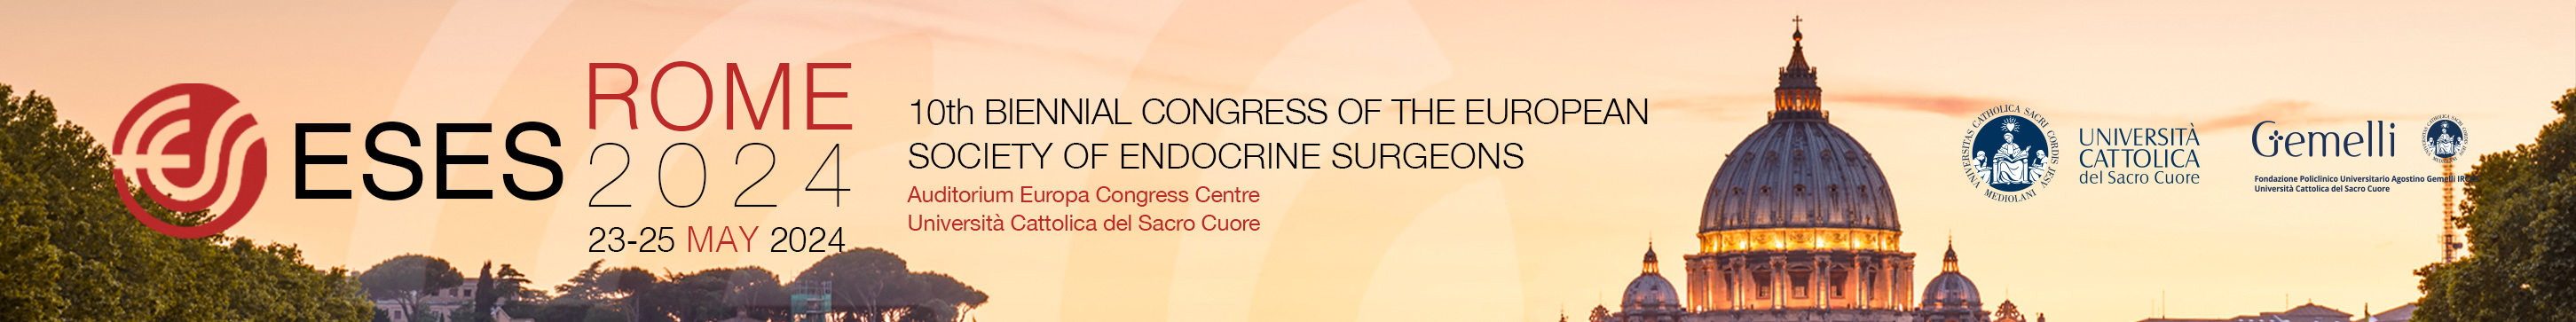 10th Biennial Congress of the European Society of Endocrine Surgeons